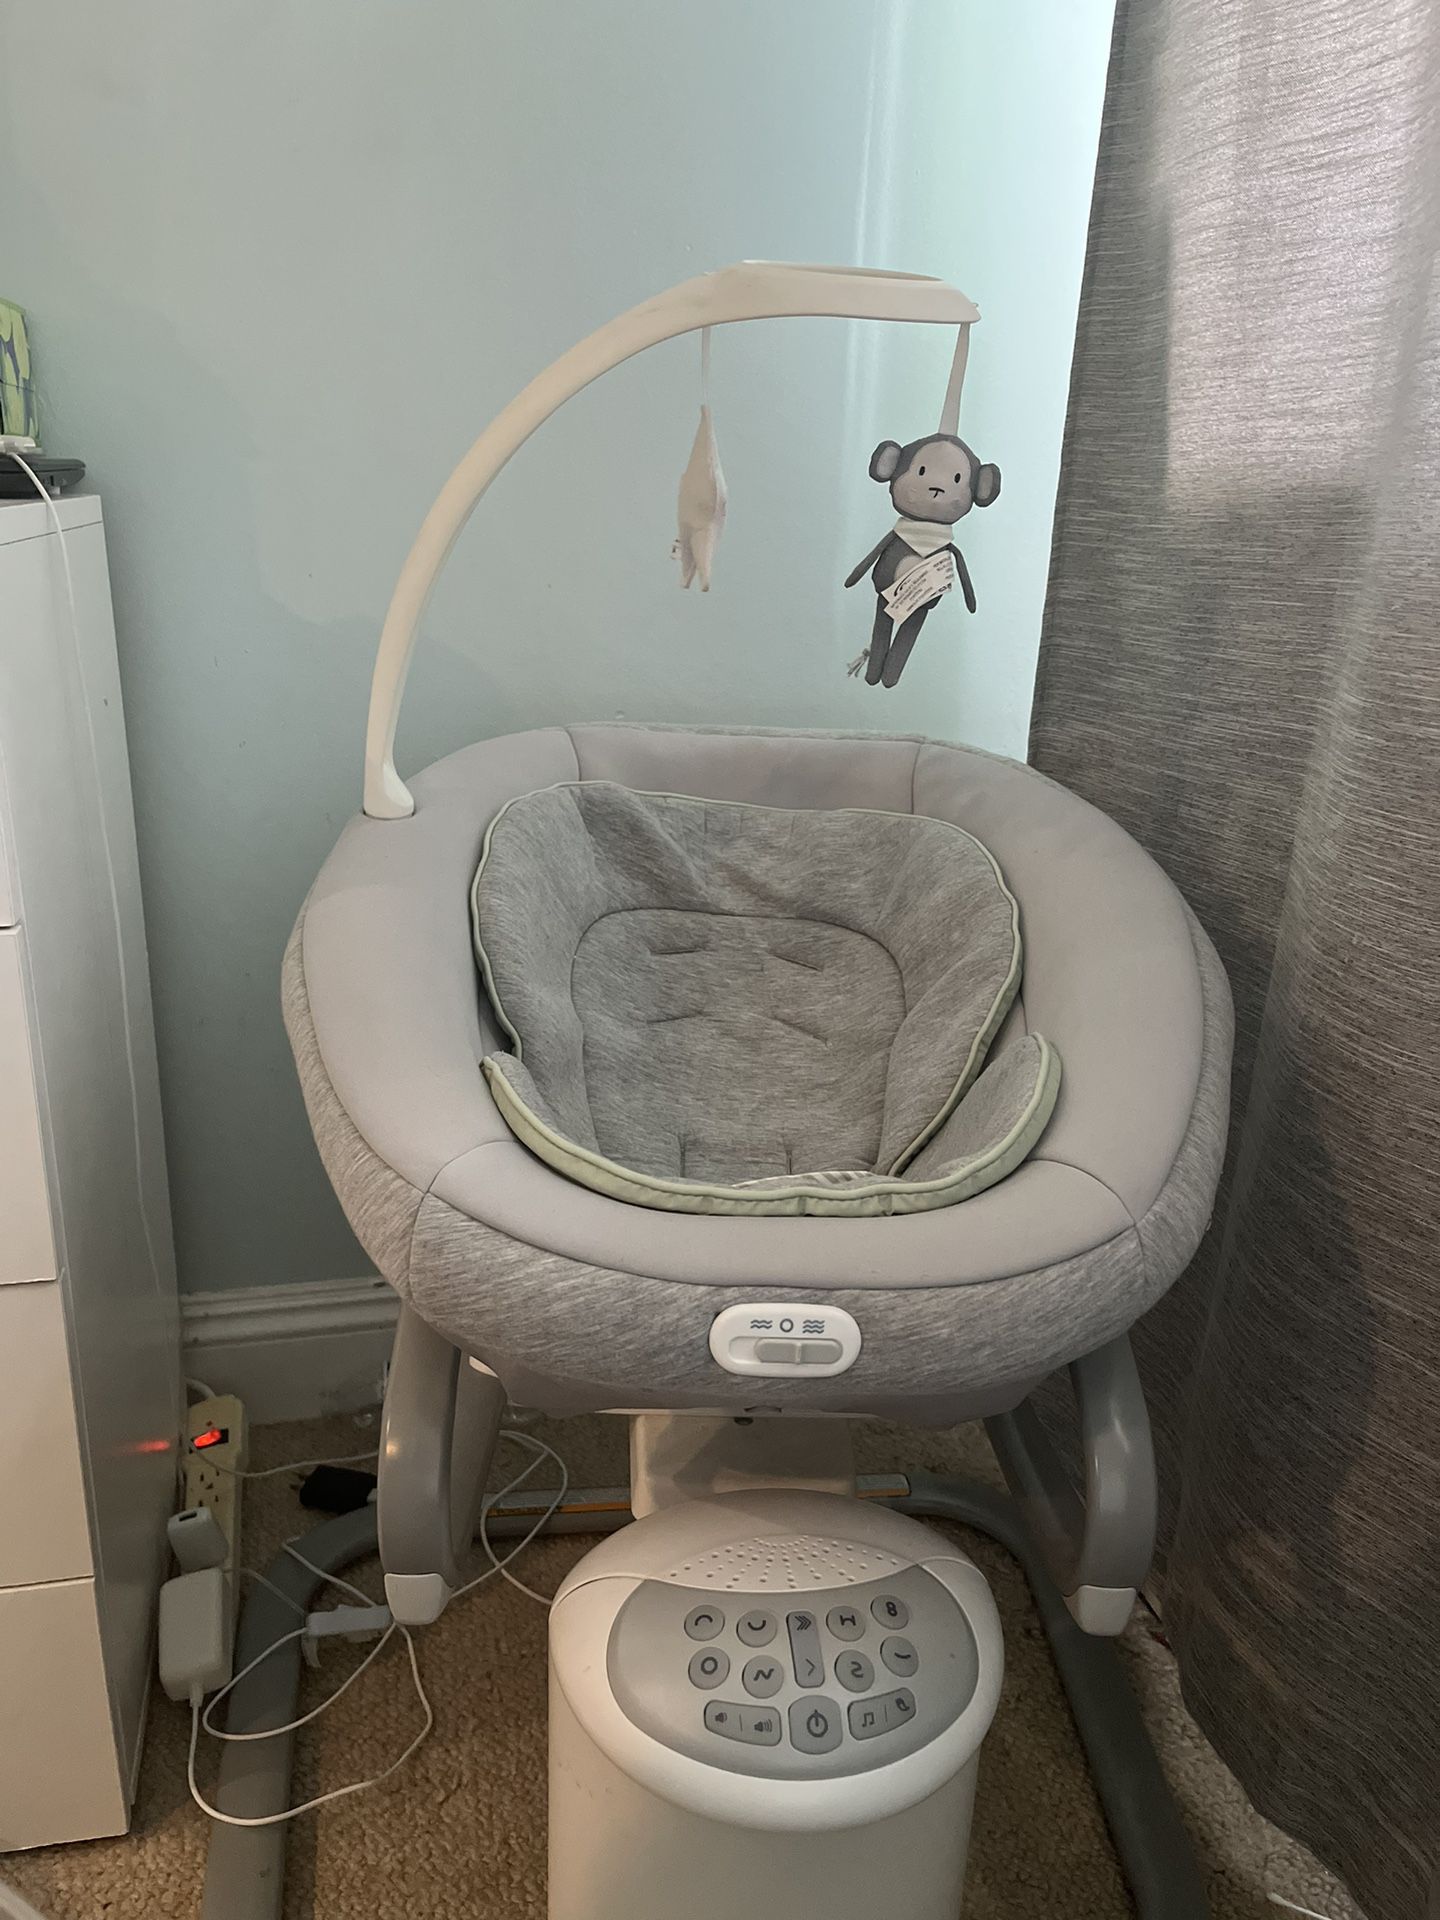 GRACO Madden Soothe My Way Baby Swing W Removible Rocker